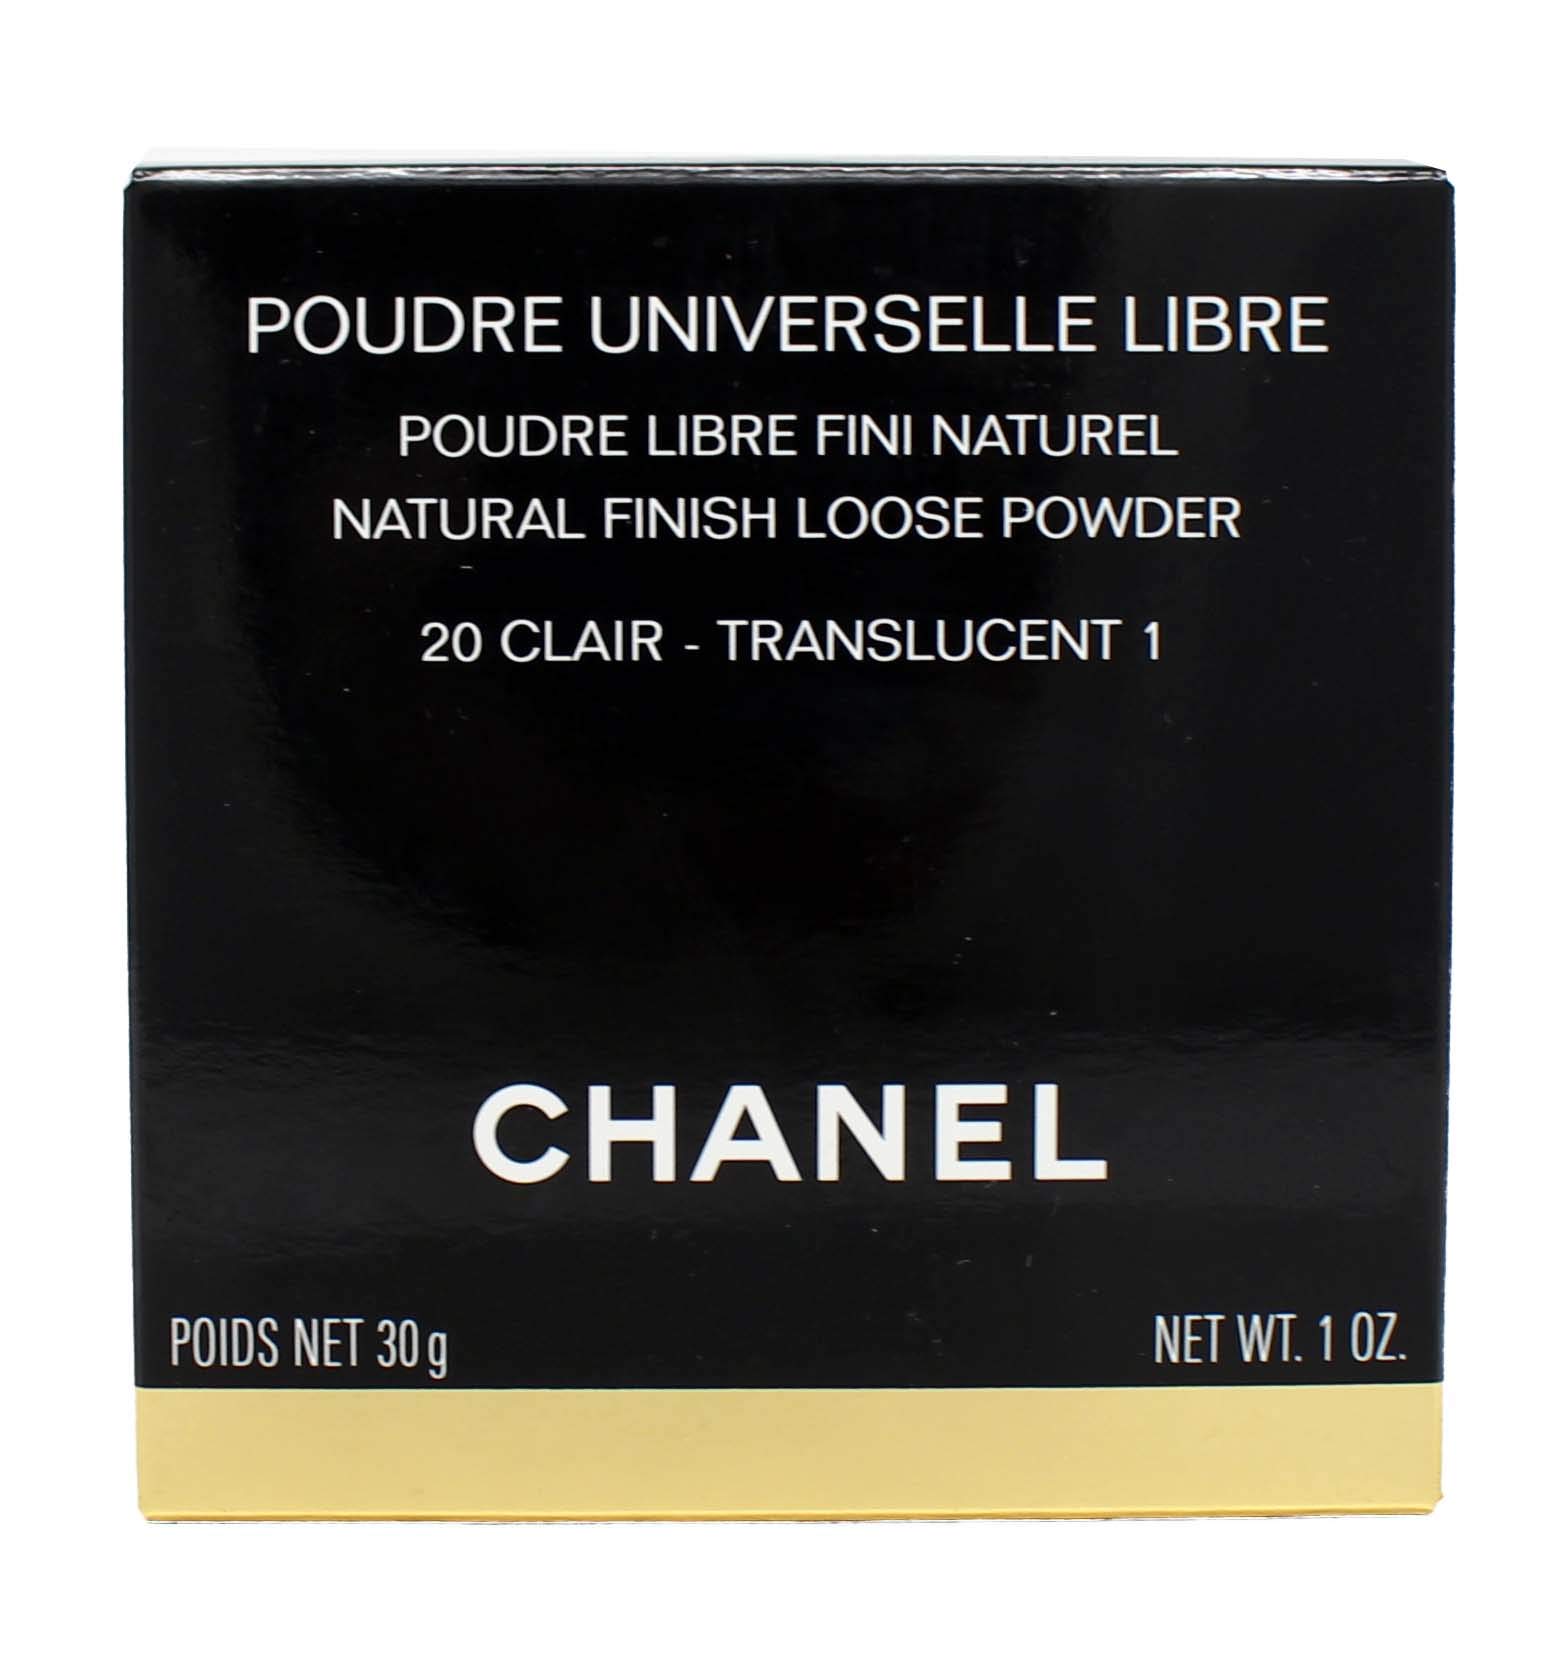 Chanel Poudre Universelle Libre Natural Finish Loose Powder No 22 Rose  Clair 30g Ingredients and Reviews